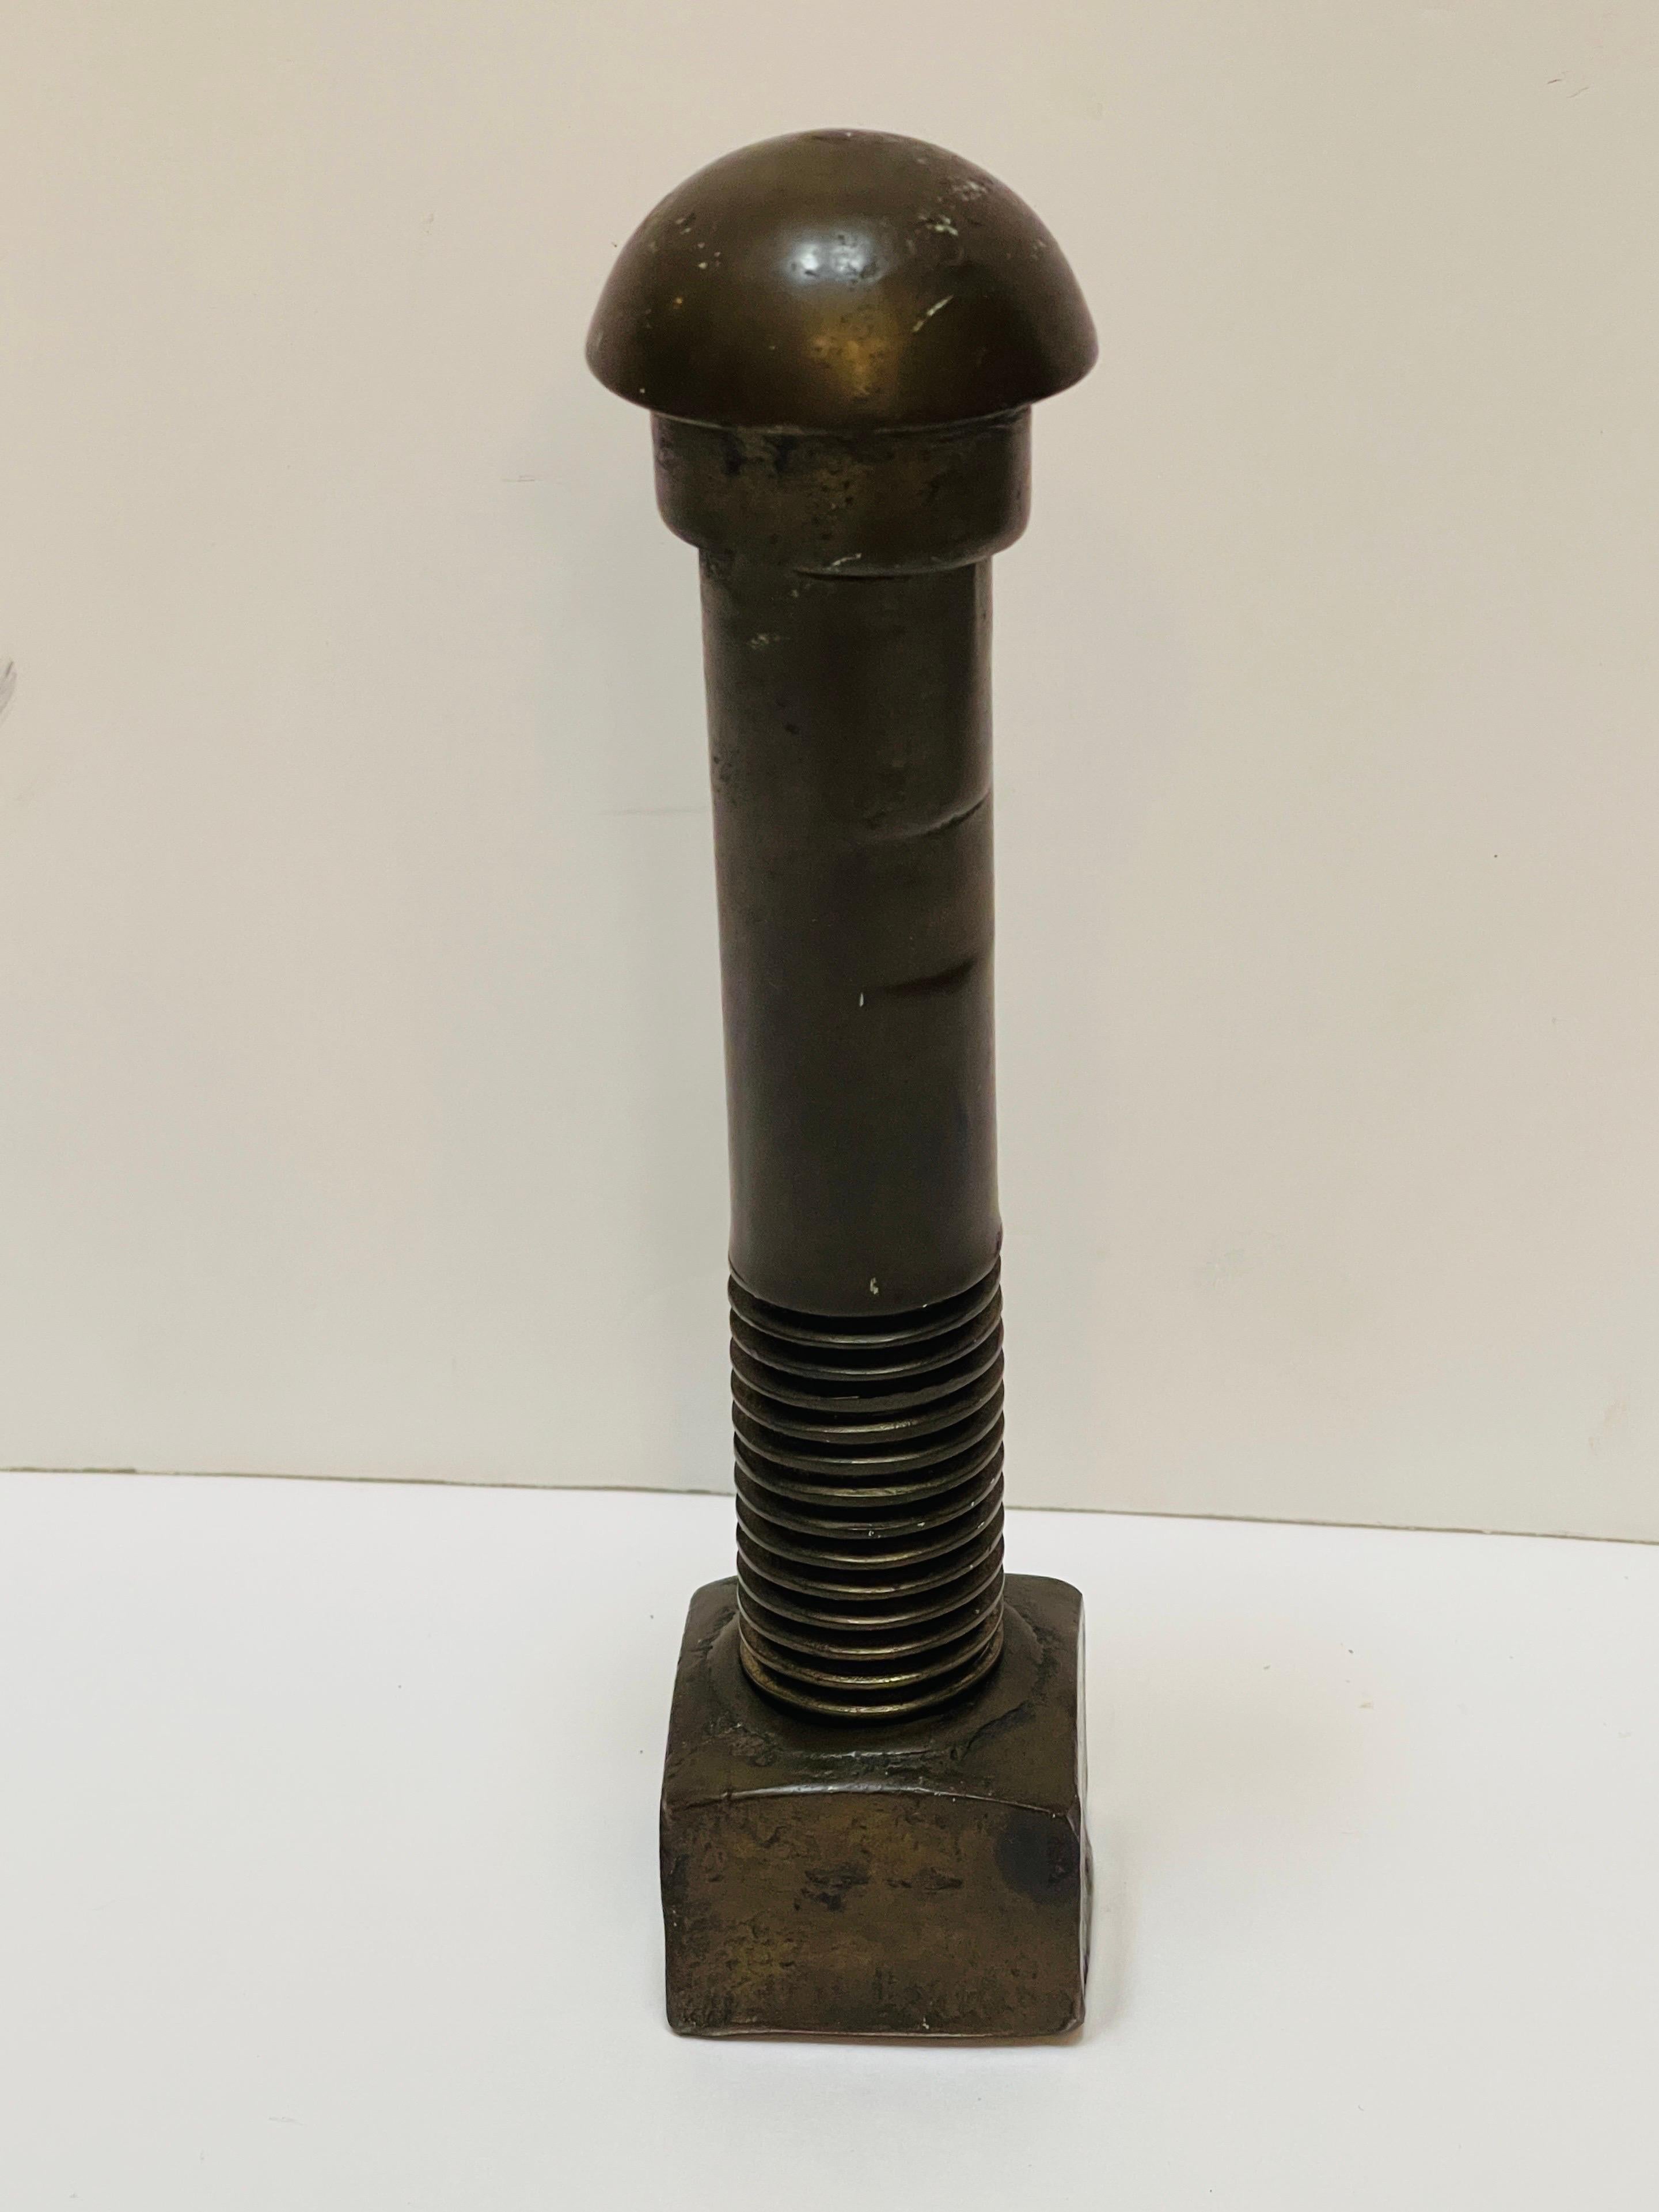 Antique Industrial 8- Inch Cast Bronze Bolt with Nut from Brooklyn Bridge*
USA, Circa 1880-1883

Beautifully made and cast, *the provenance is by repute was a leftover carriage bolt from the initial construction of the Brooklyn Bridge in 1883.